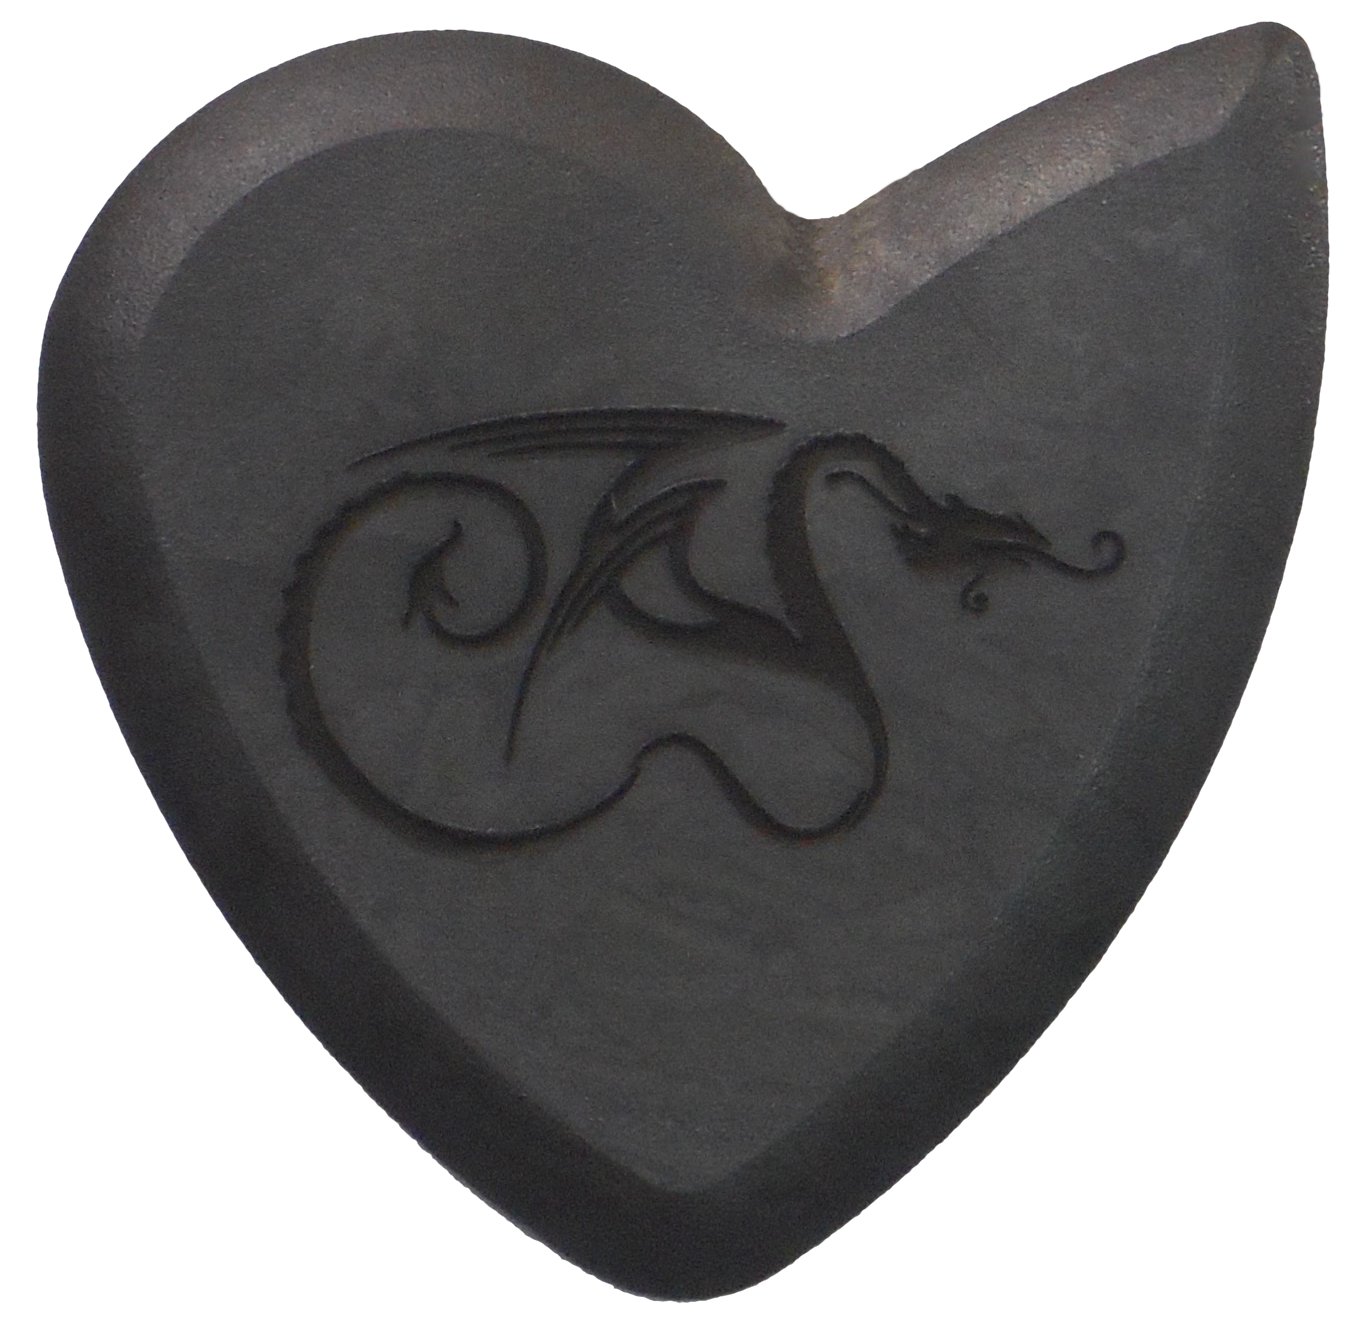 Book Cover Original Dragon's Heart Guitar Pick - 1000 Hours of Durability, 2.5mm Thickness, Single Pack